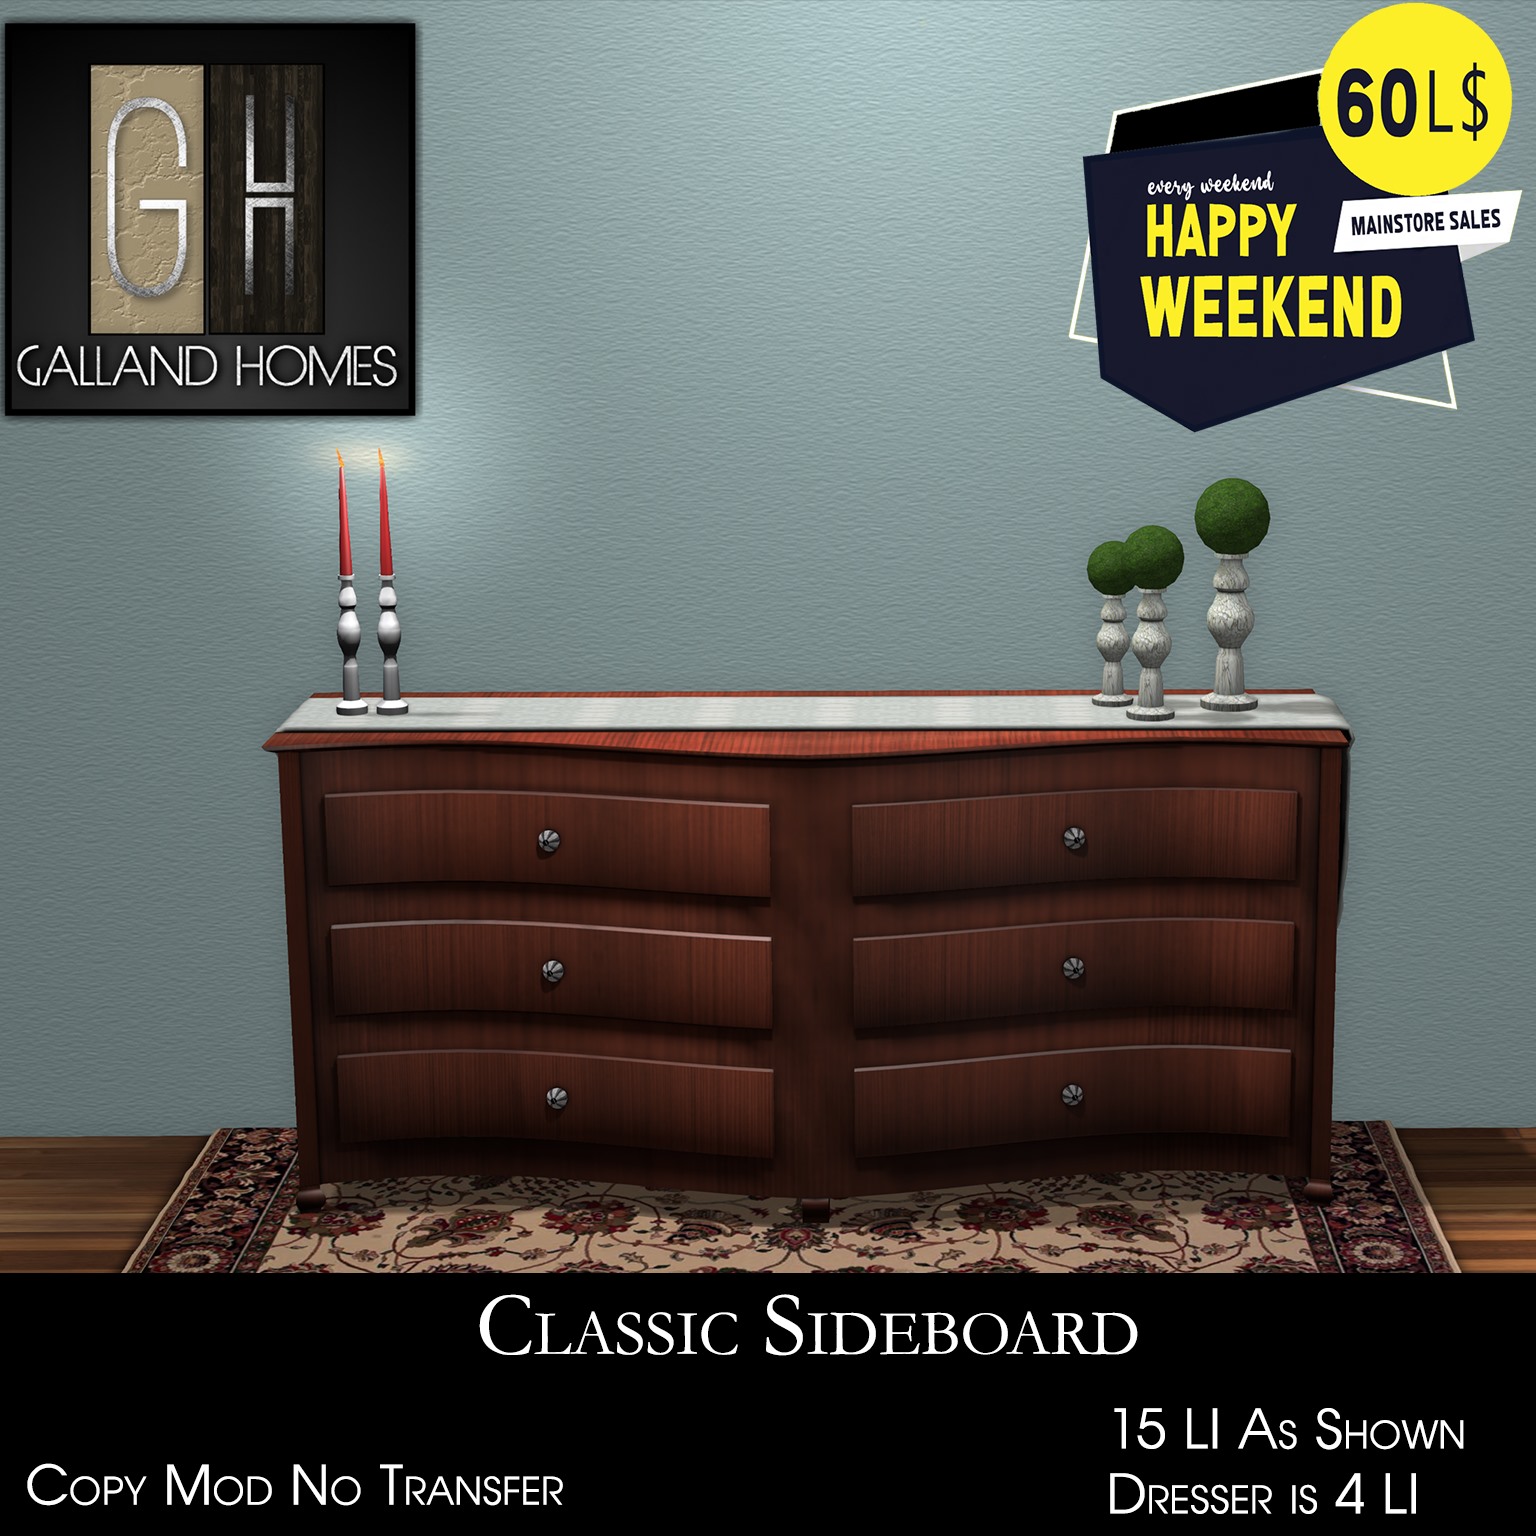 Galland Homes – Classic Sideboard